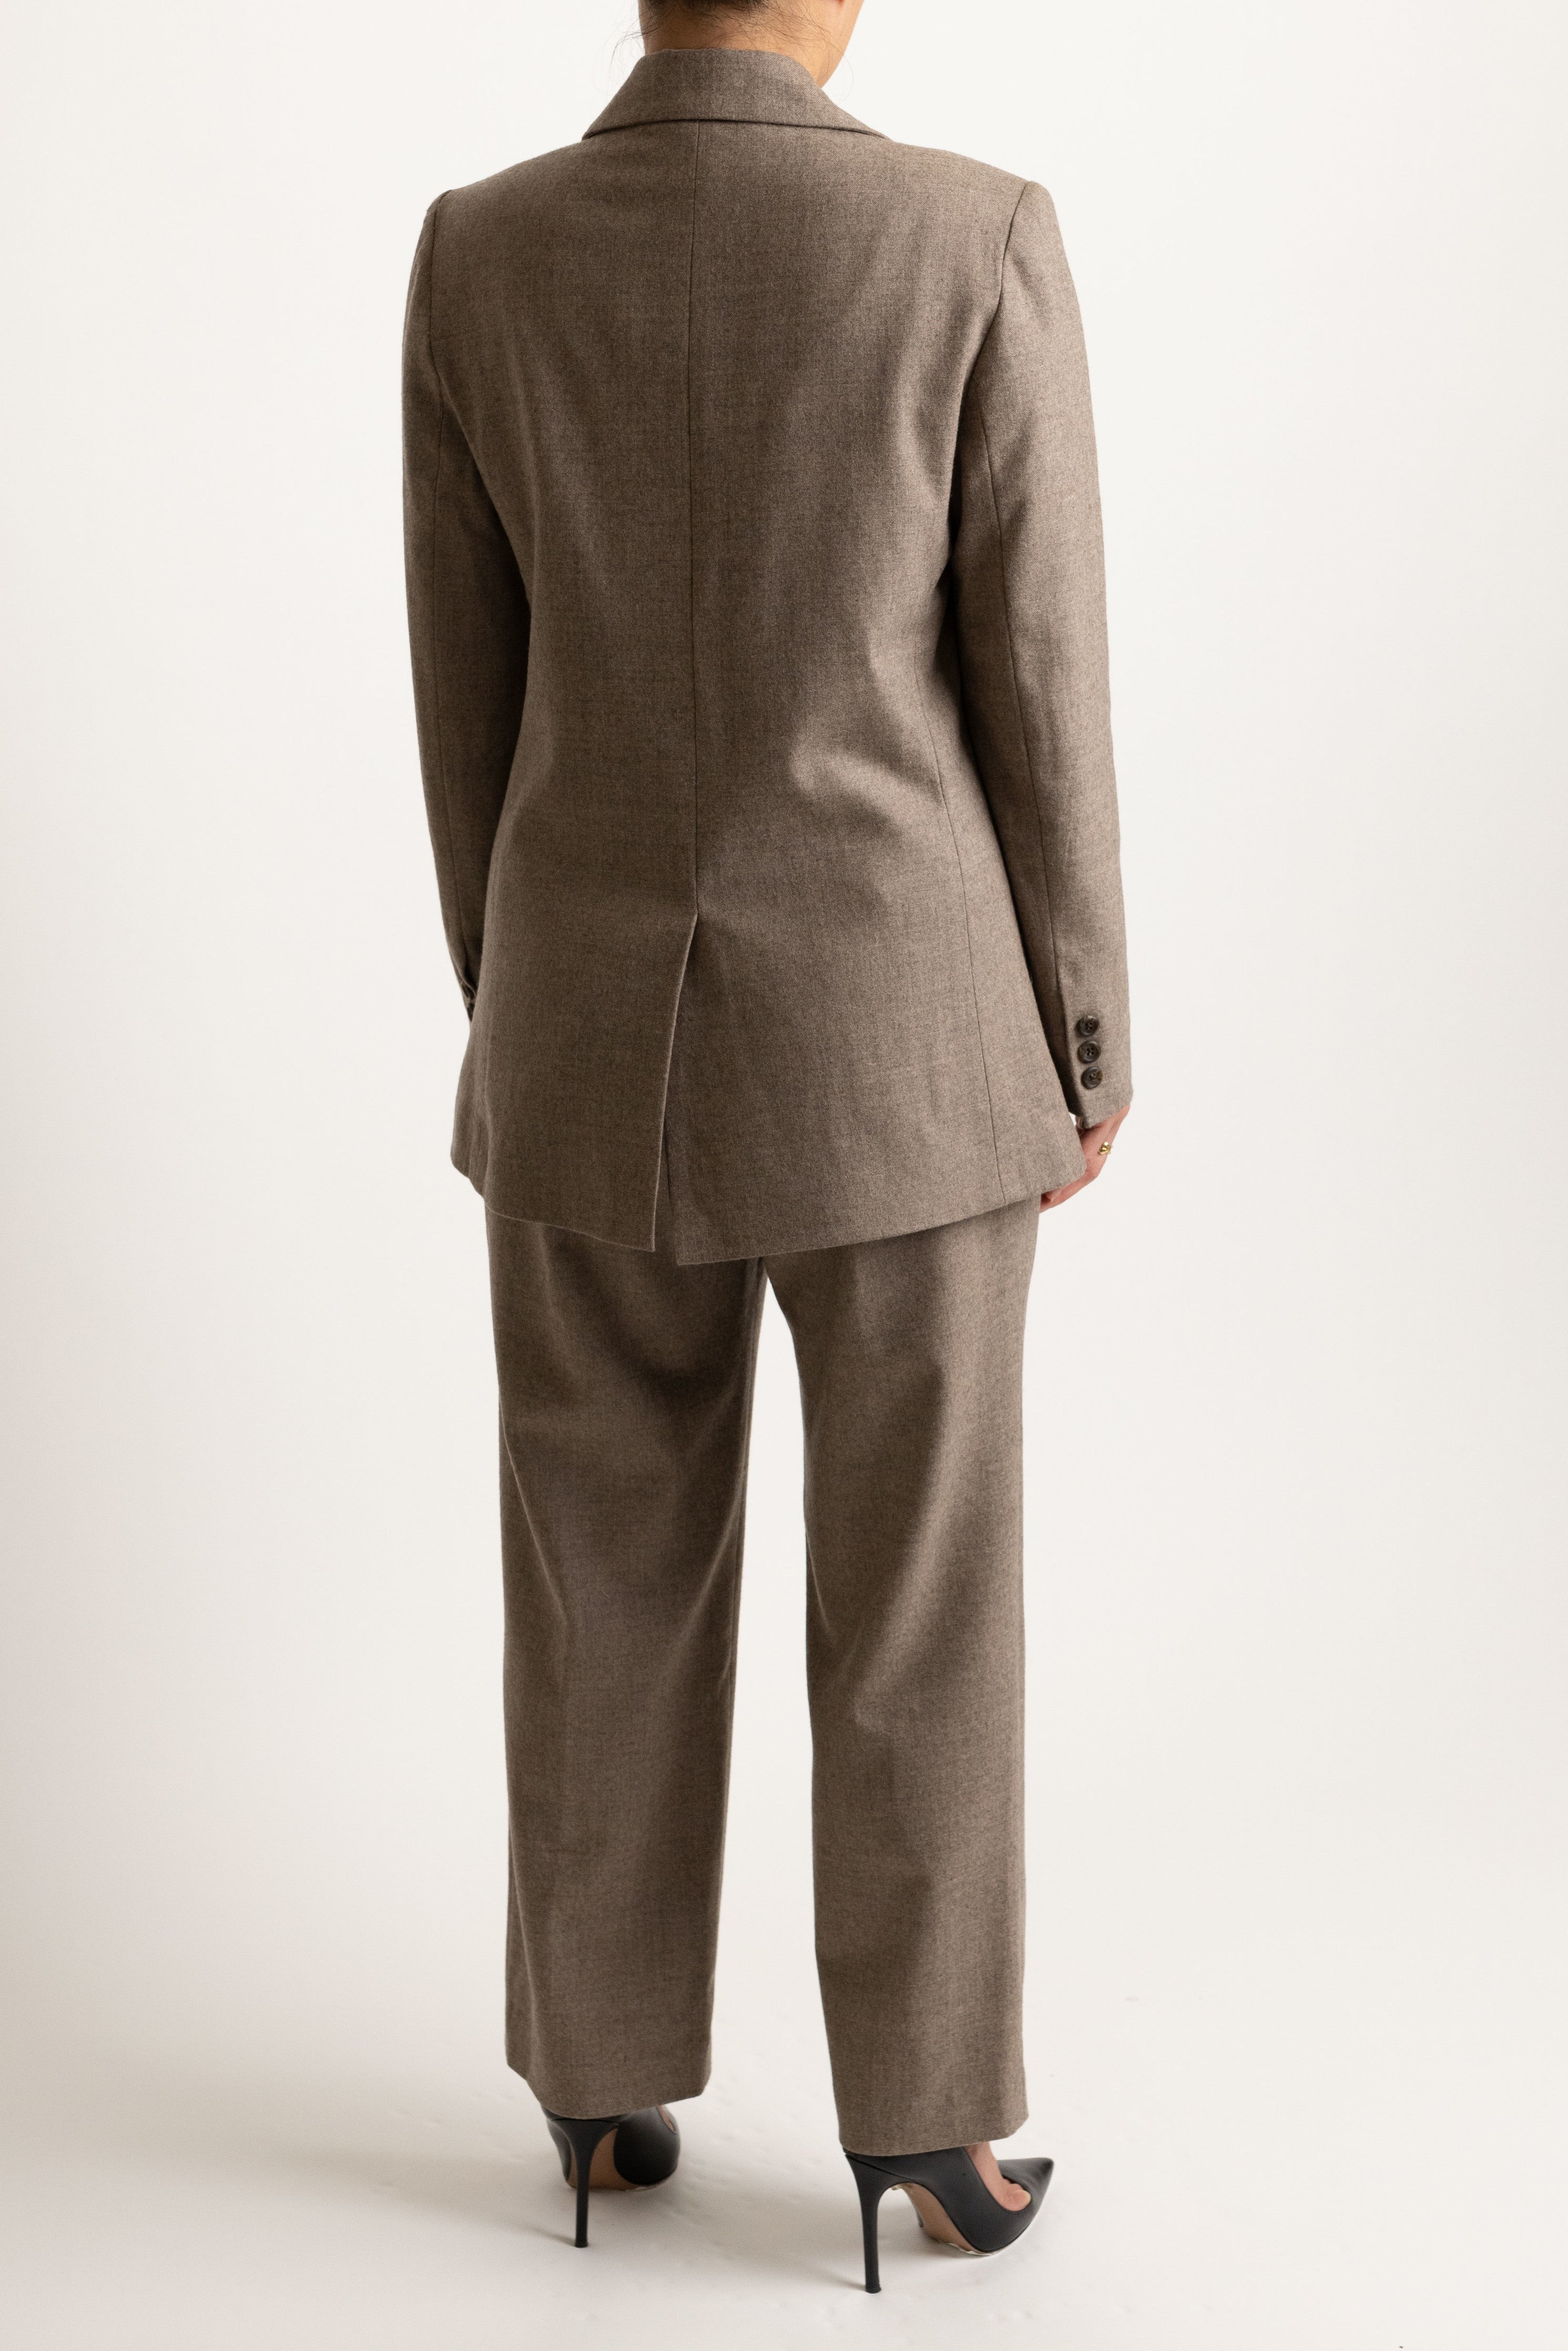 Court Jacket in Coffee - back of jacket, center-back vent